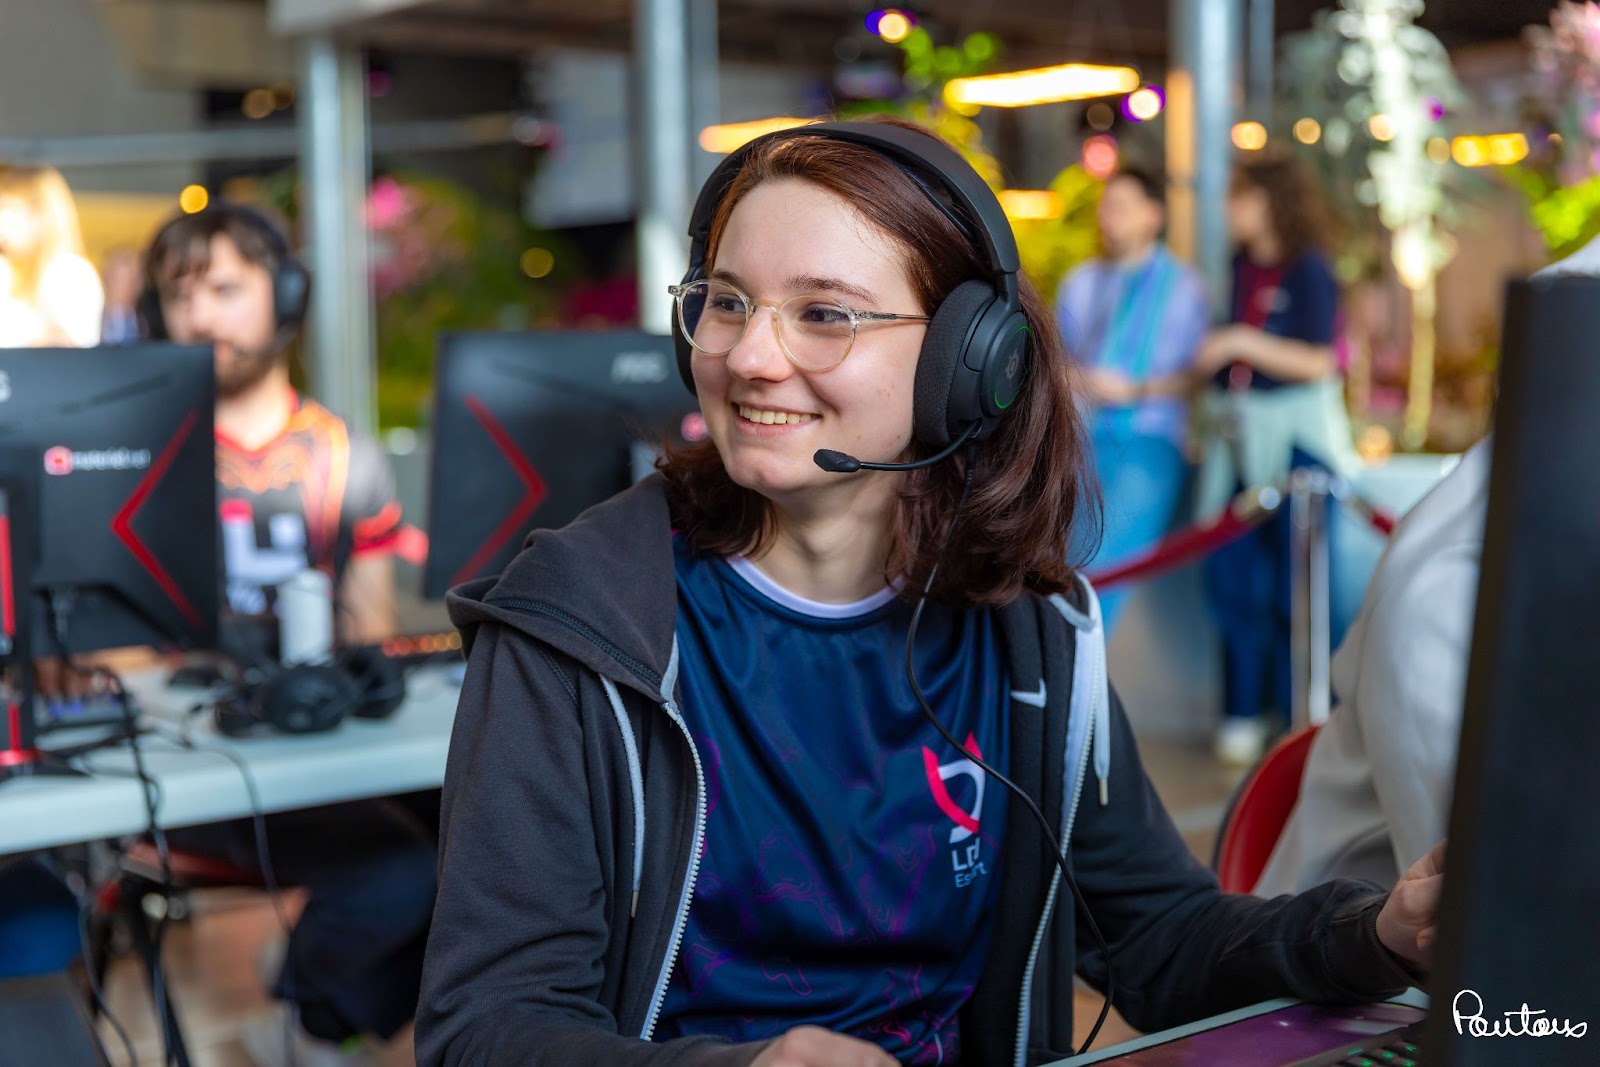 Claire playing in a gaming competition - women in games - Dassault Systemes blog